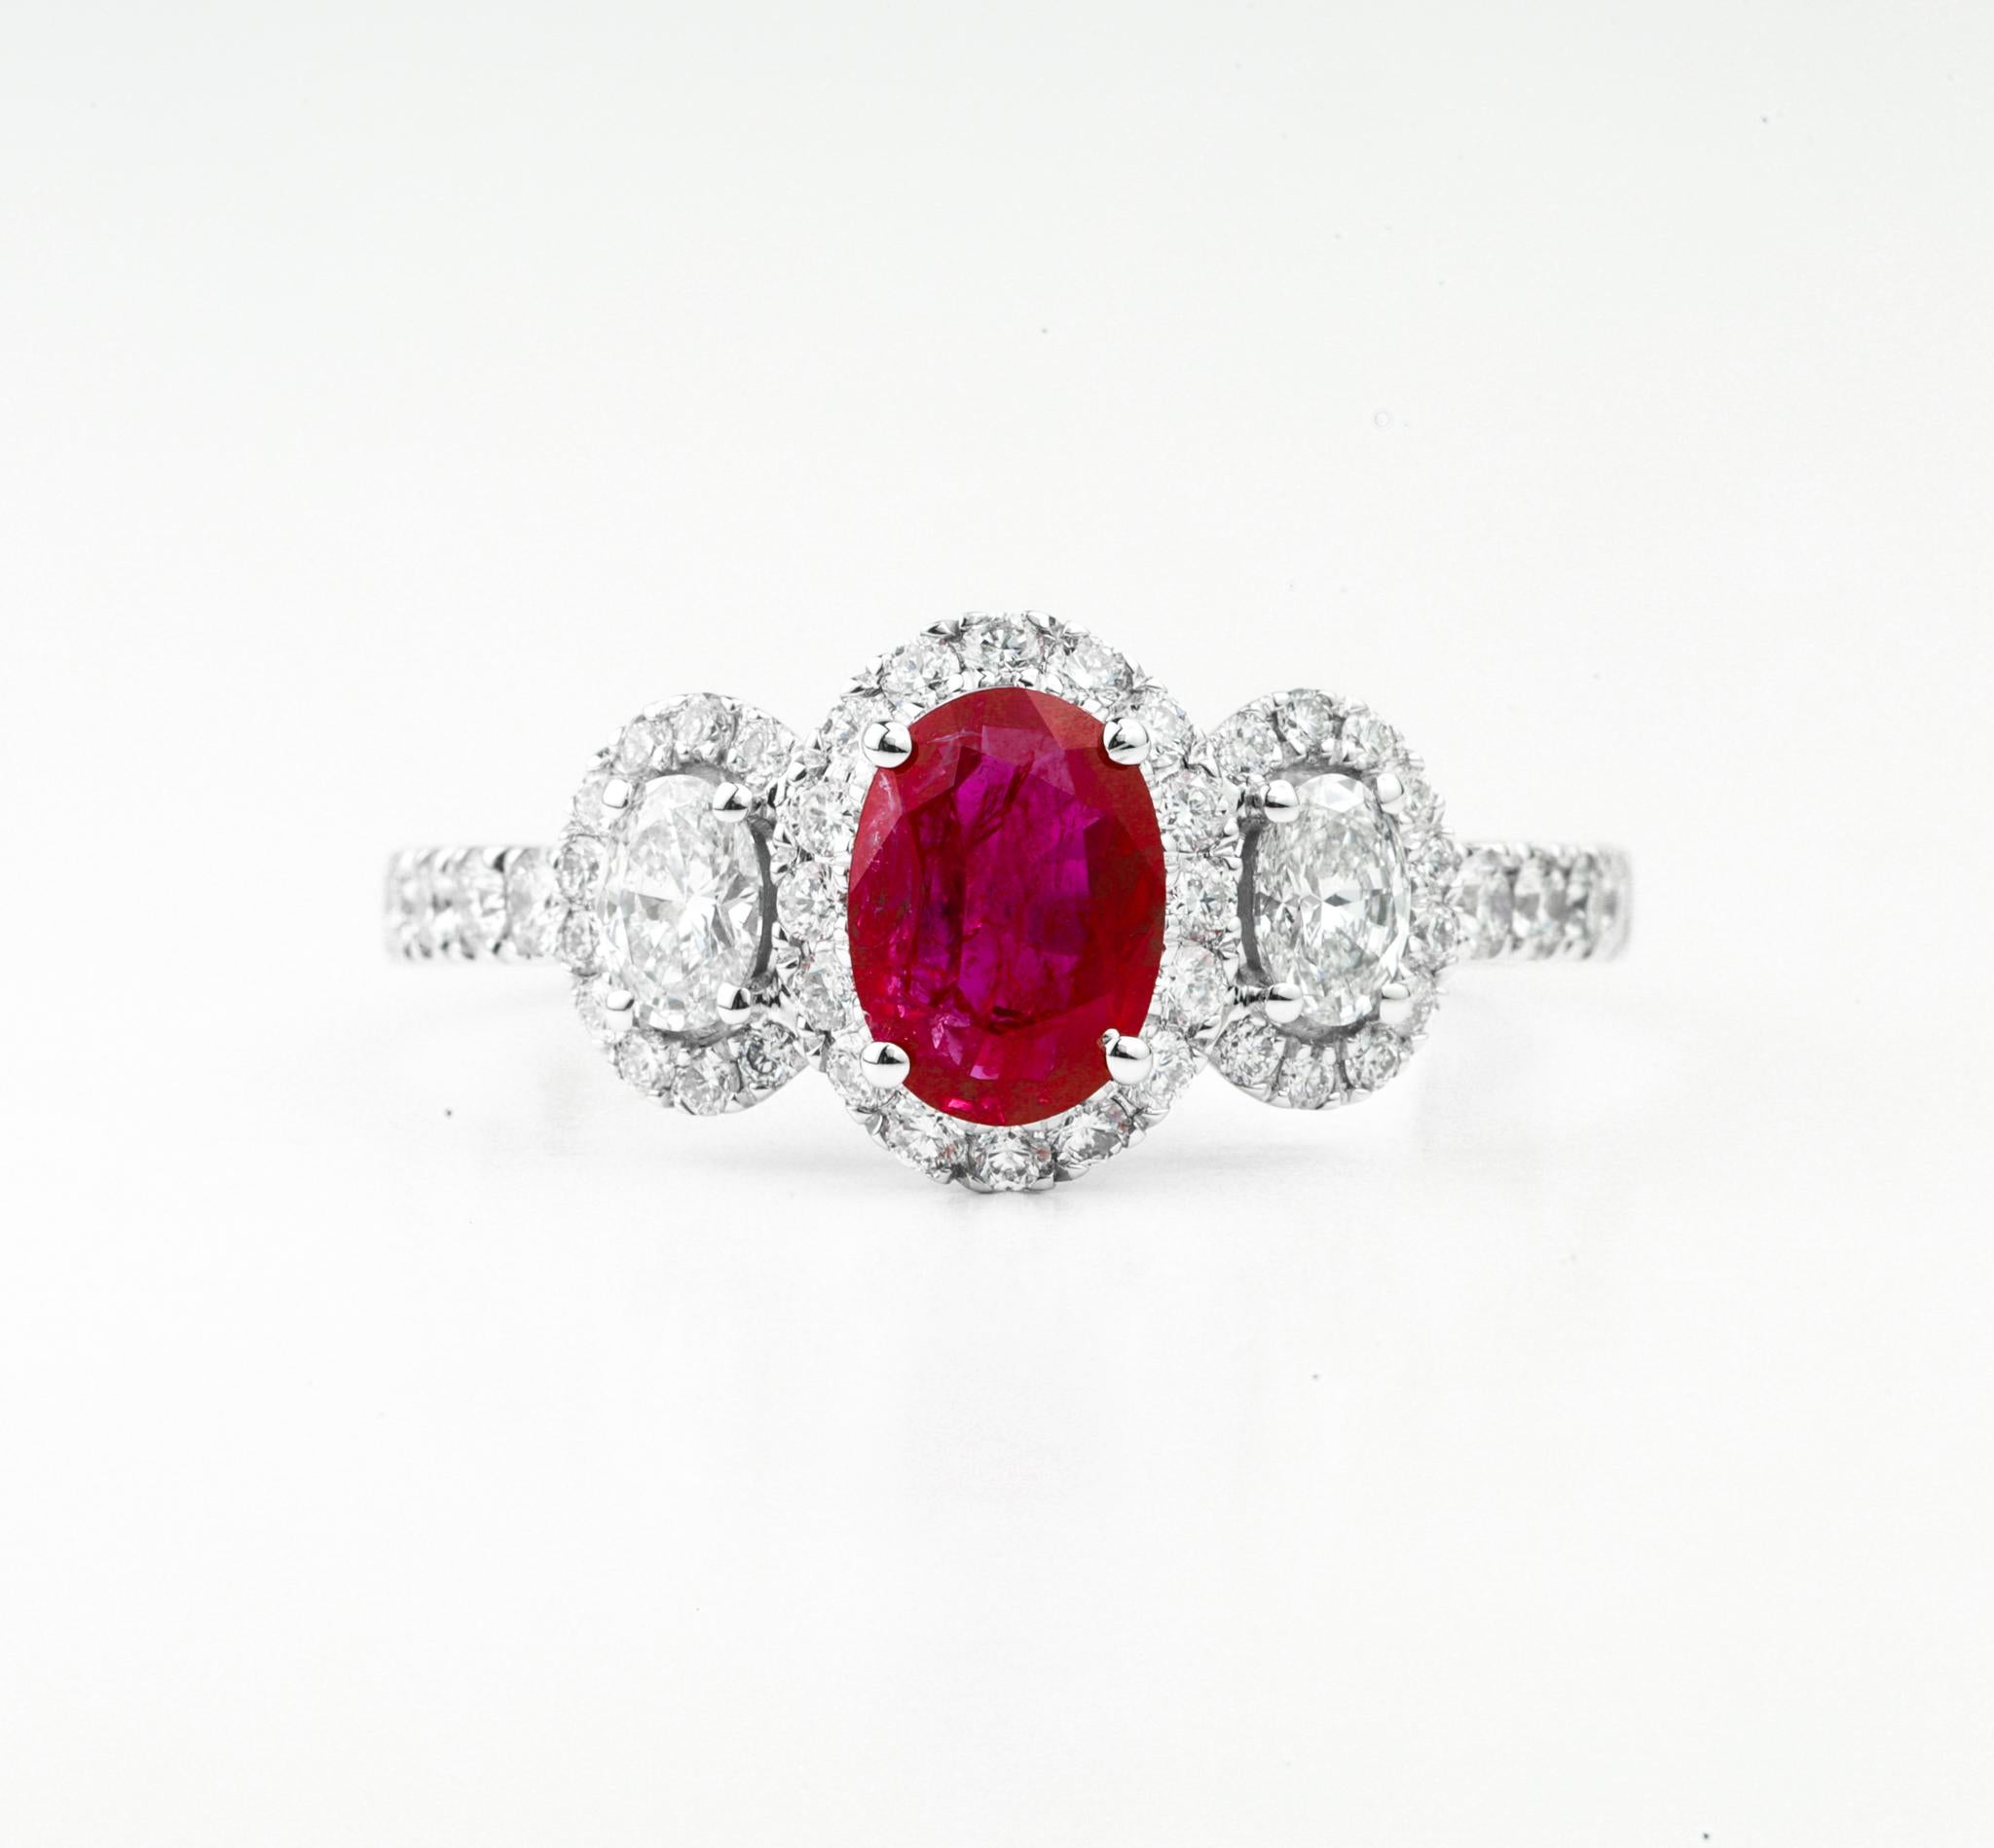 Oval Cut Red Ruby Diamond Three Stone Halo Engagement Ring in 18k White Gold

Available in 18k white gold.

Same design can be made also with other custom gemstones per request.

Product details:

- Solid gold

- Diamond - approx. 0.73 carat

- Ruby